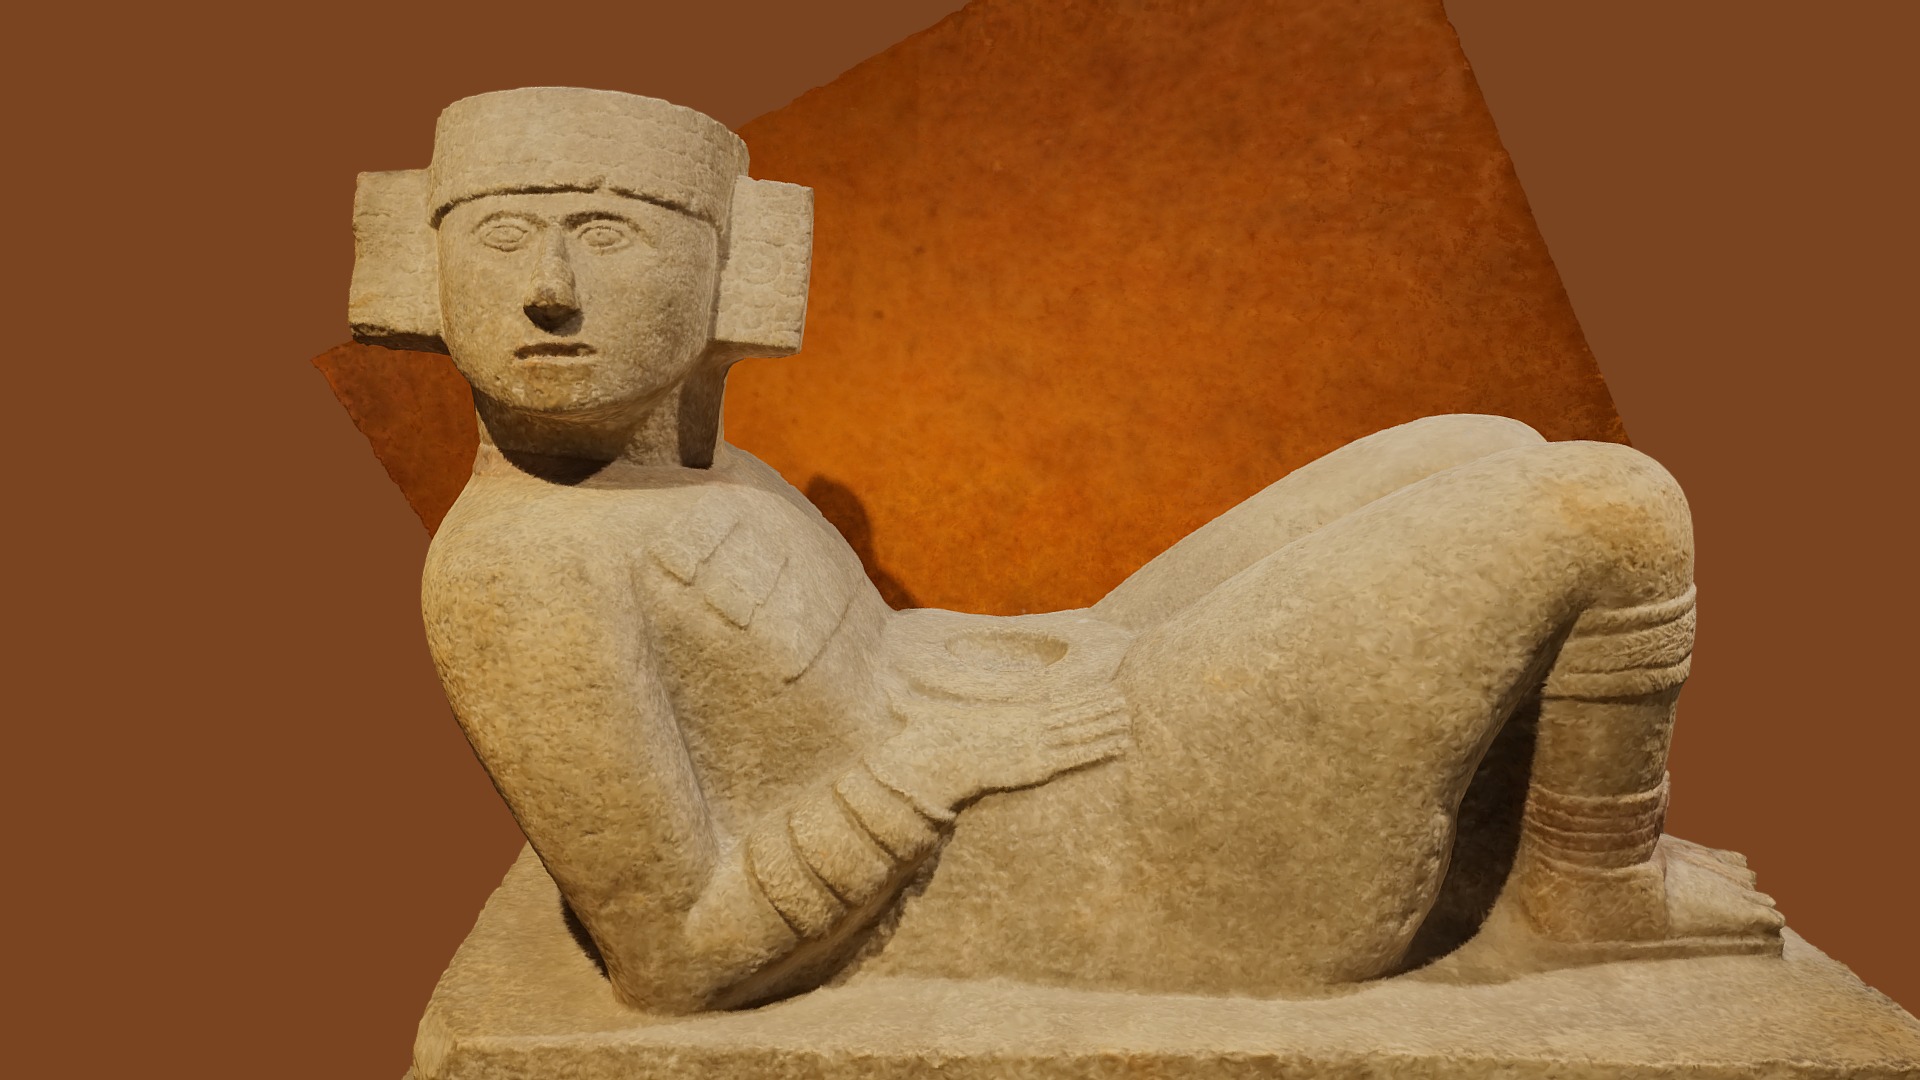 3D model Chac-mool - This is a 3D model of the Chac-mool. The 3D model is about a stone sculpture of a person.